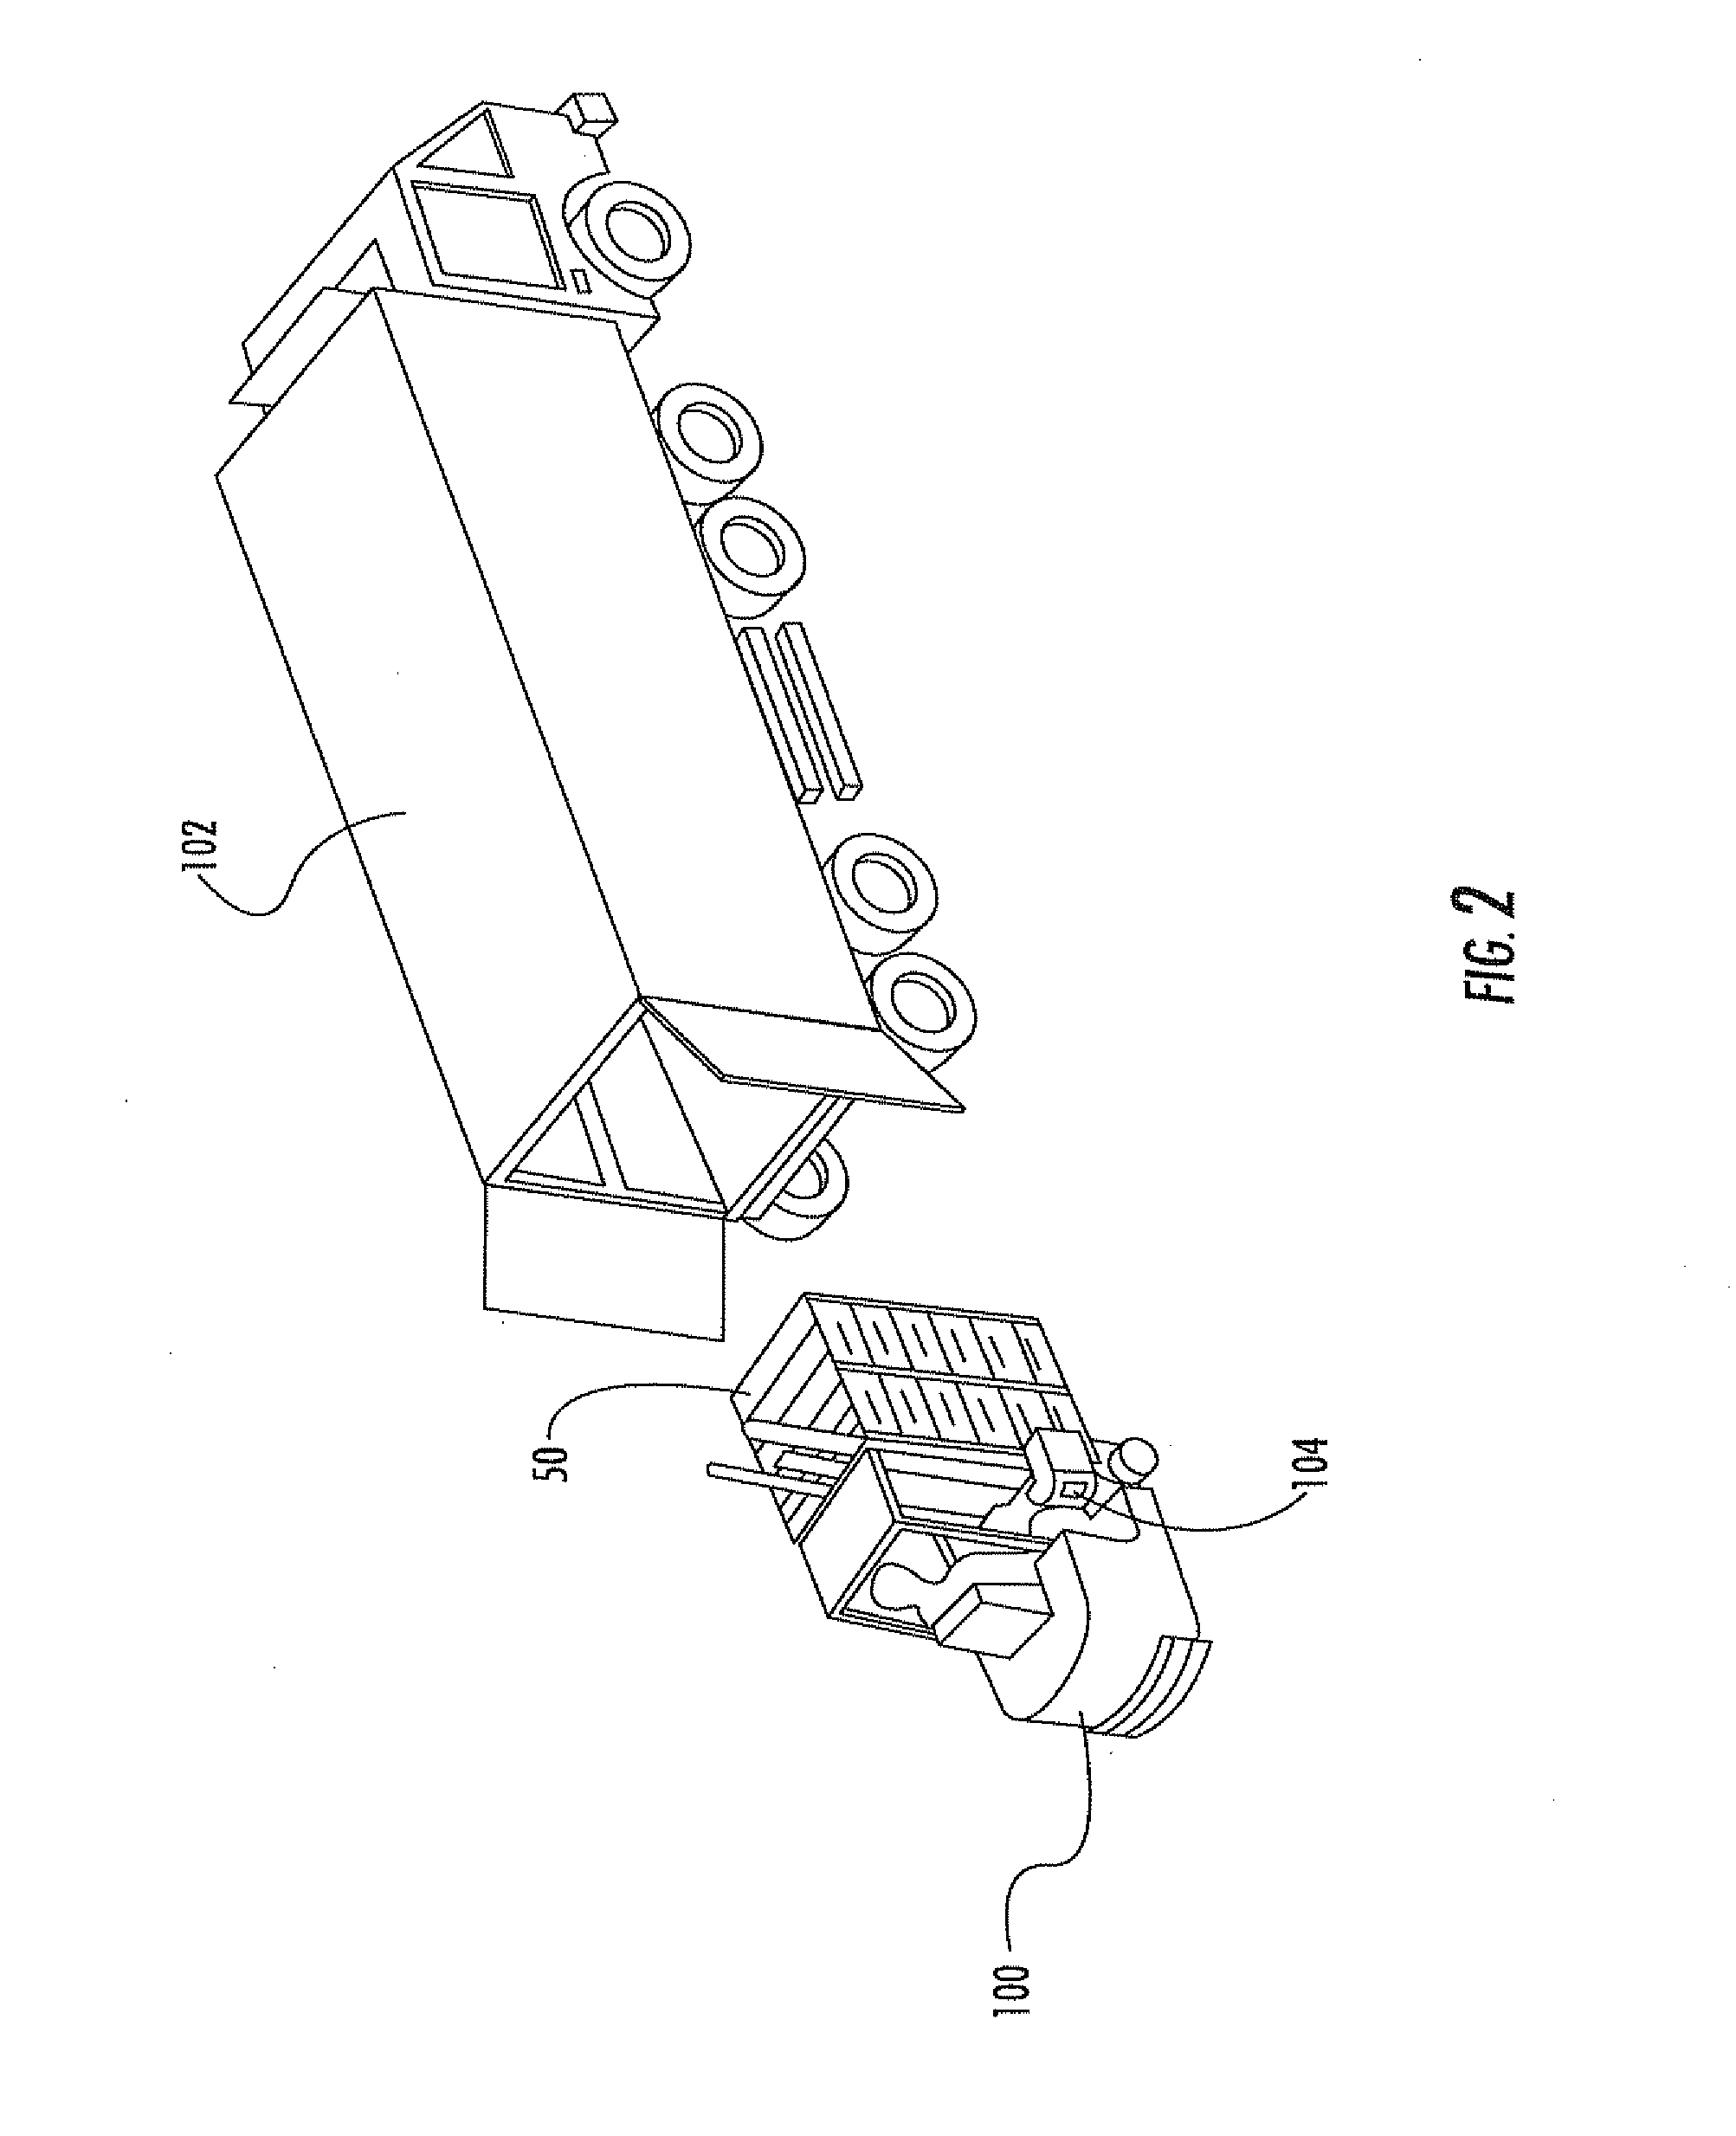 Board removal apparatus for a pallet and associated methods